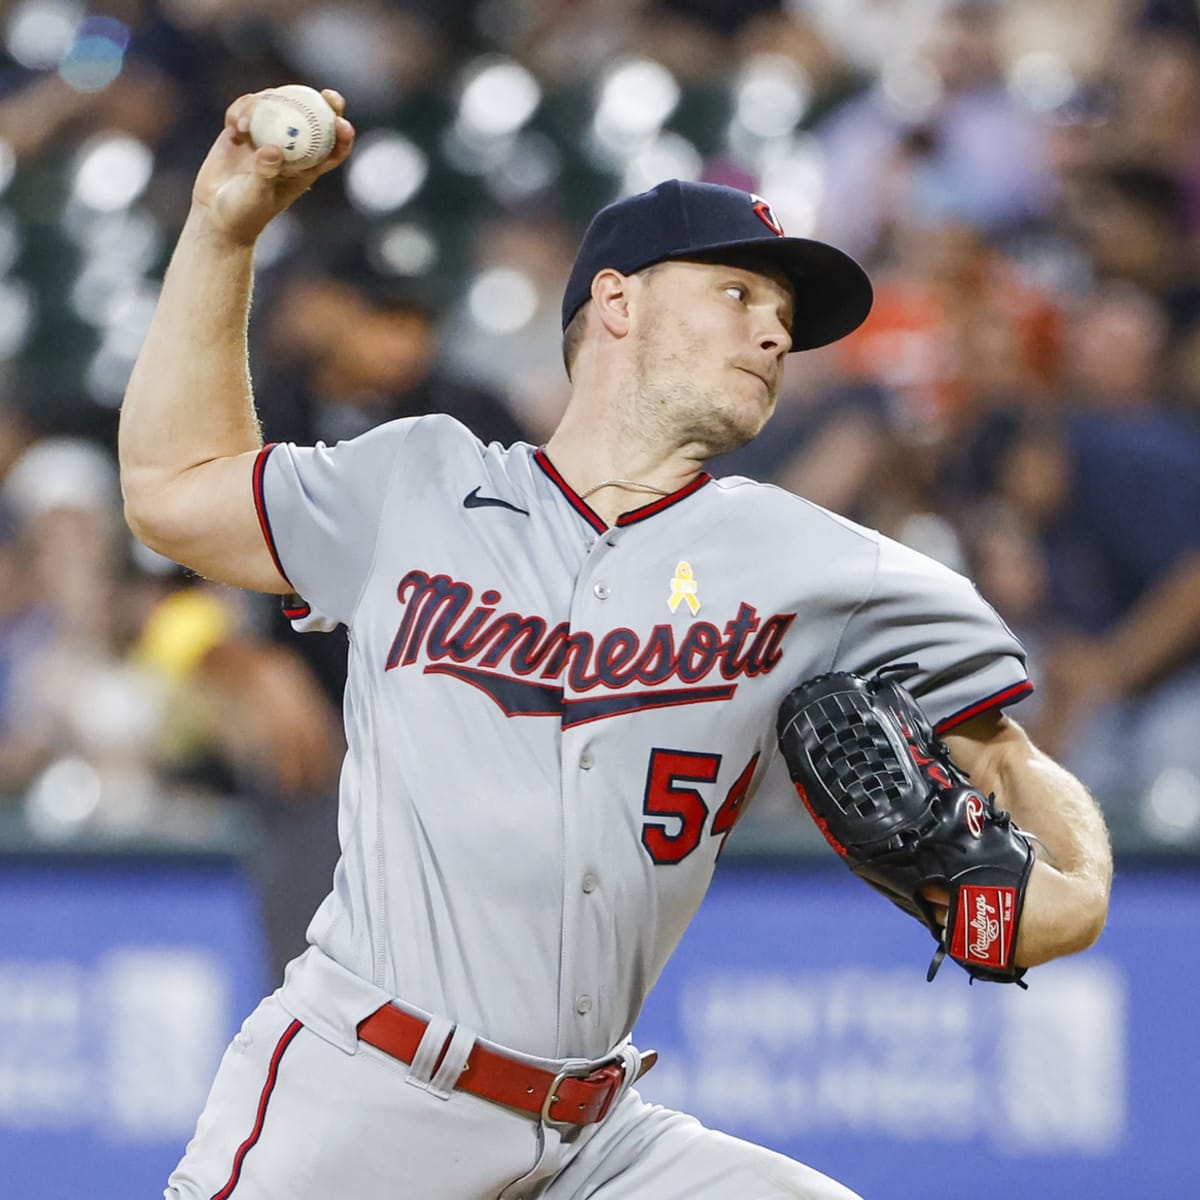 After a split in Cleveland, Twins loom for the White Sox